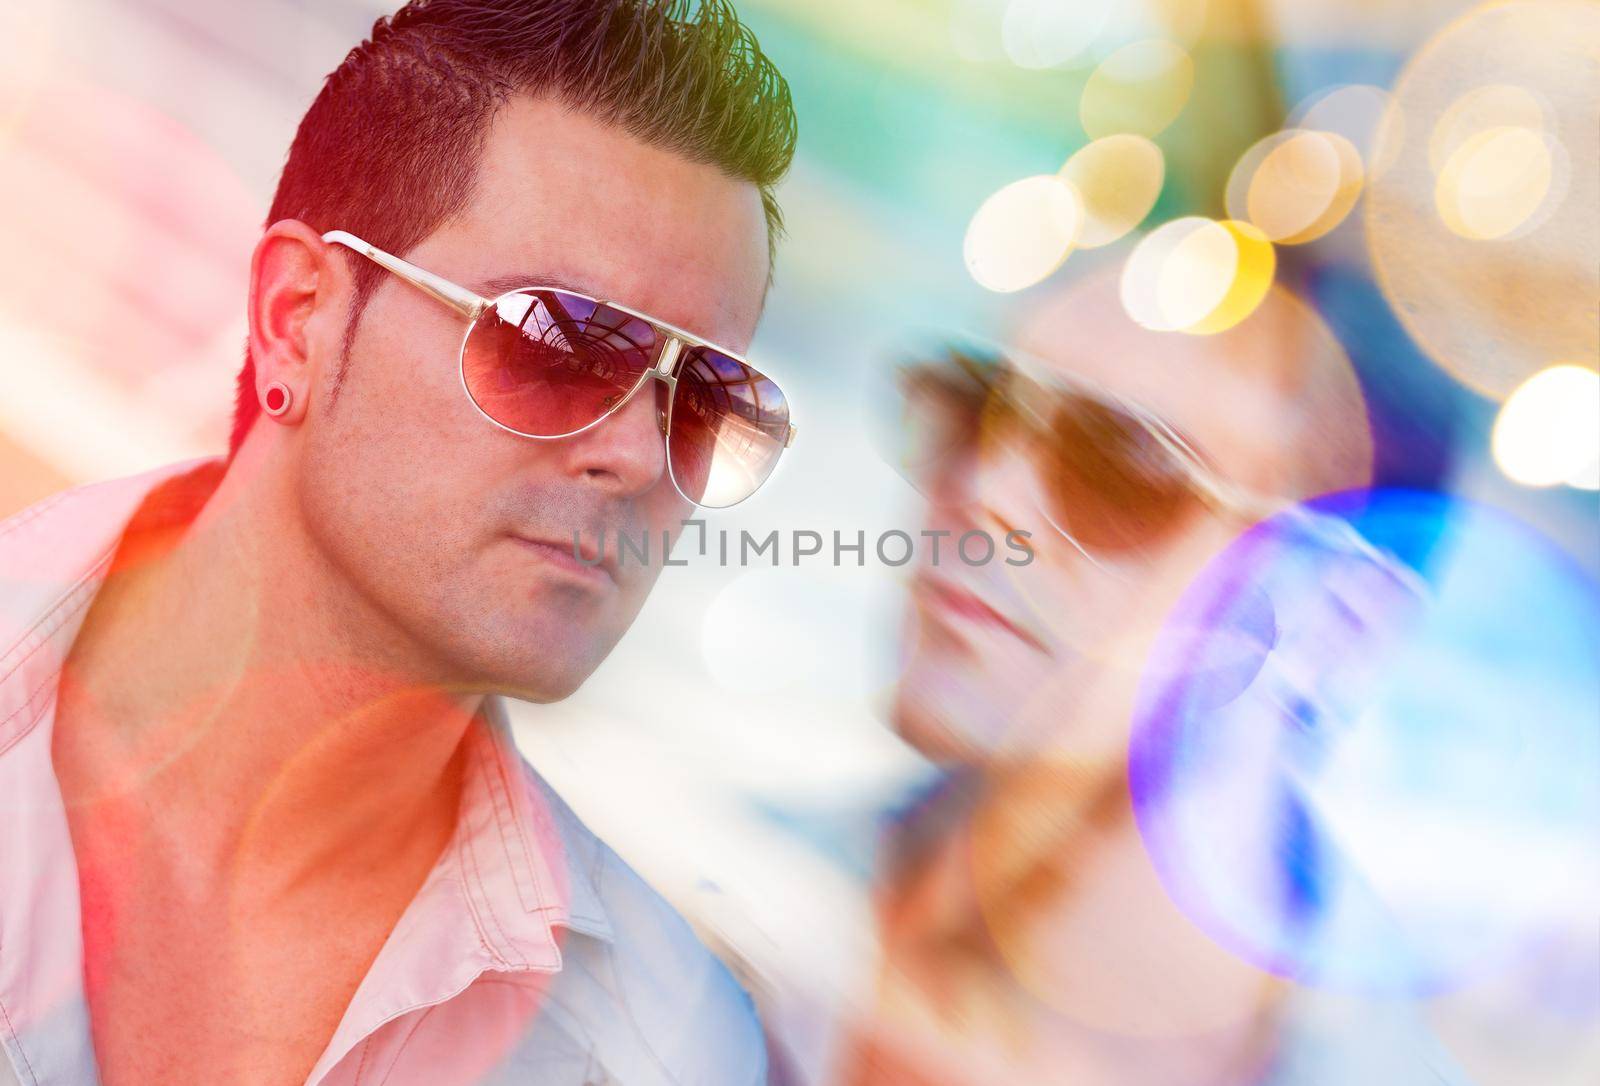 Fashion man portrait in the city and lights lens  flare.